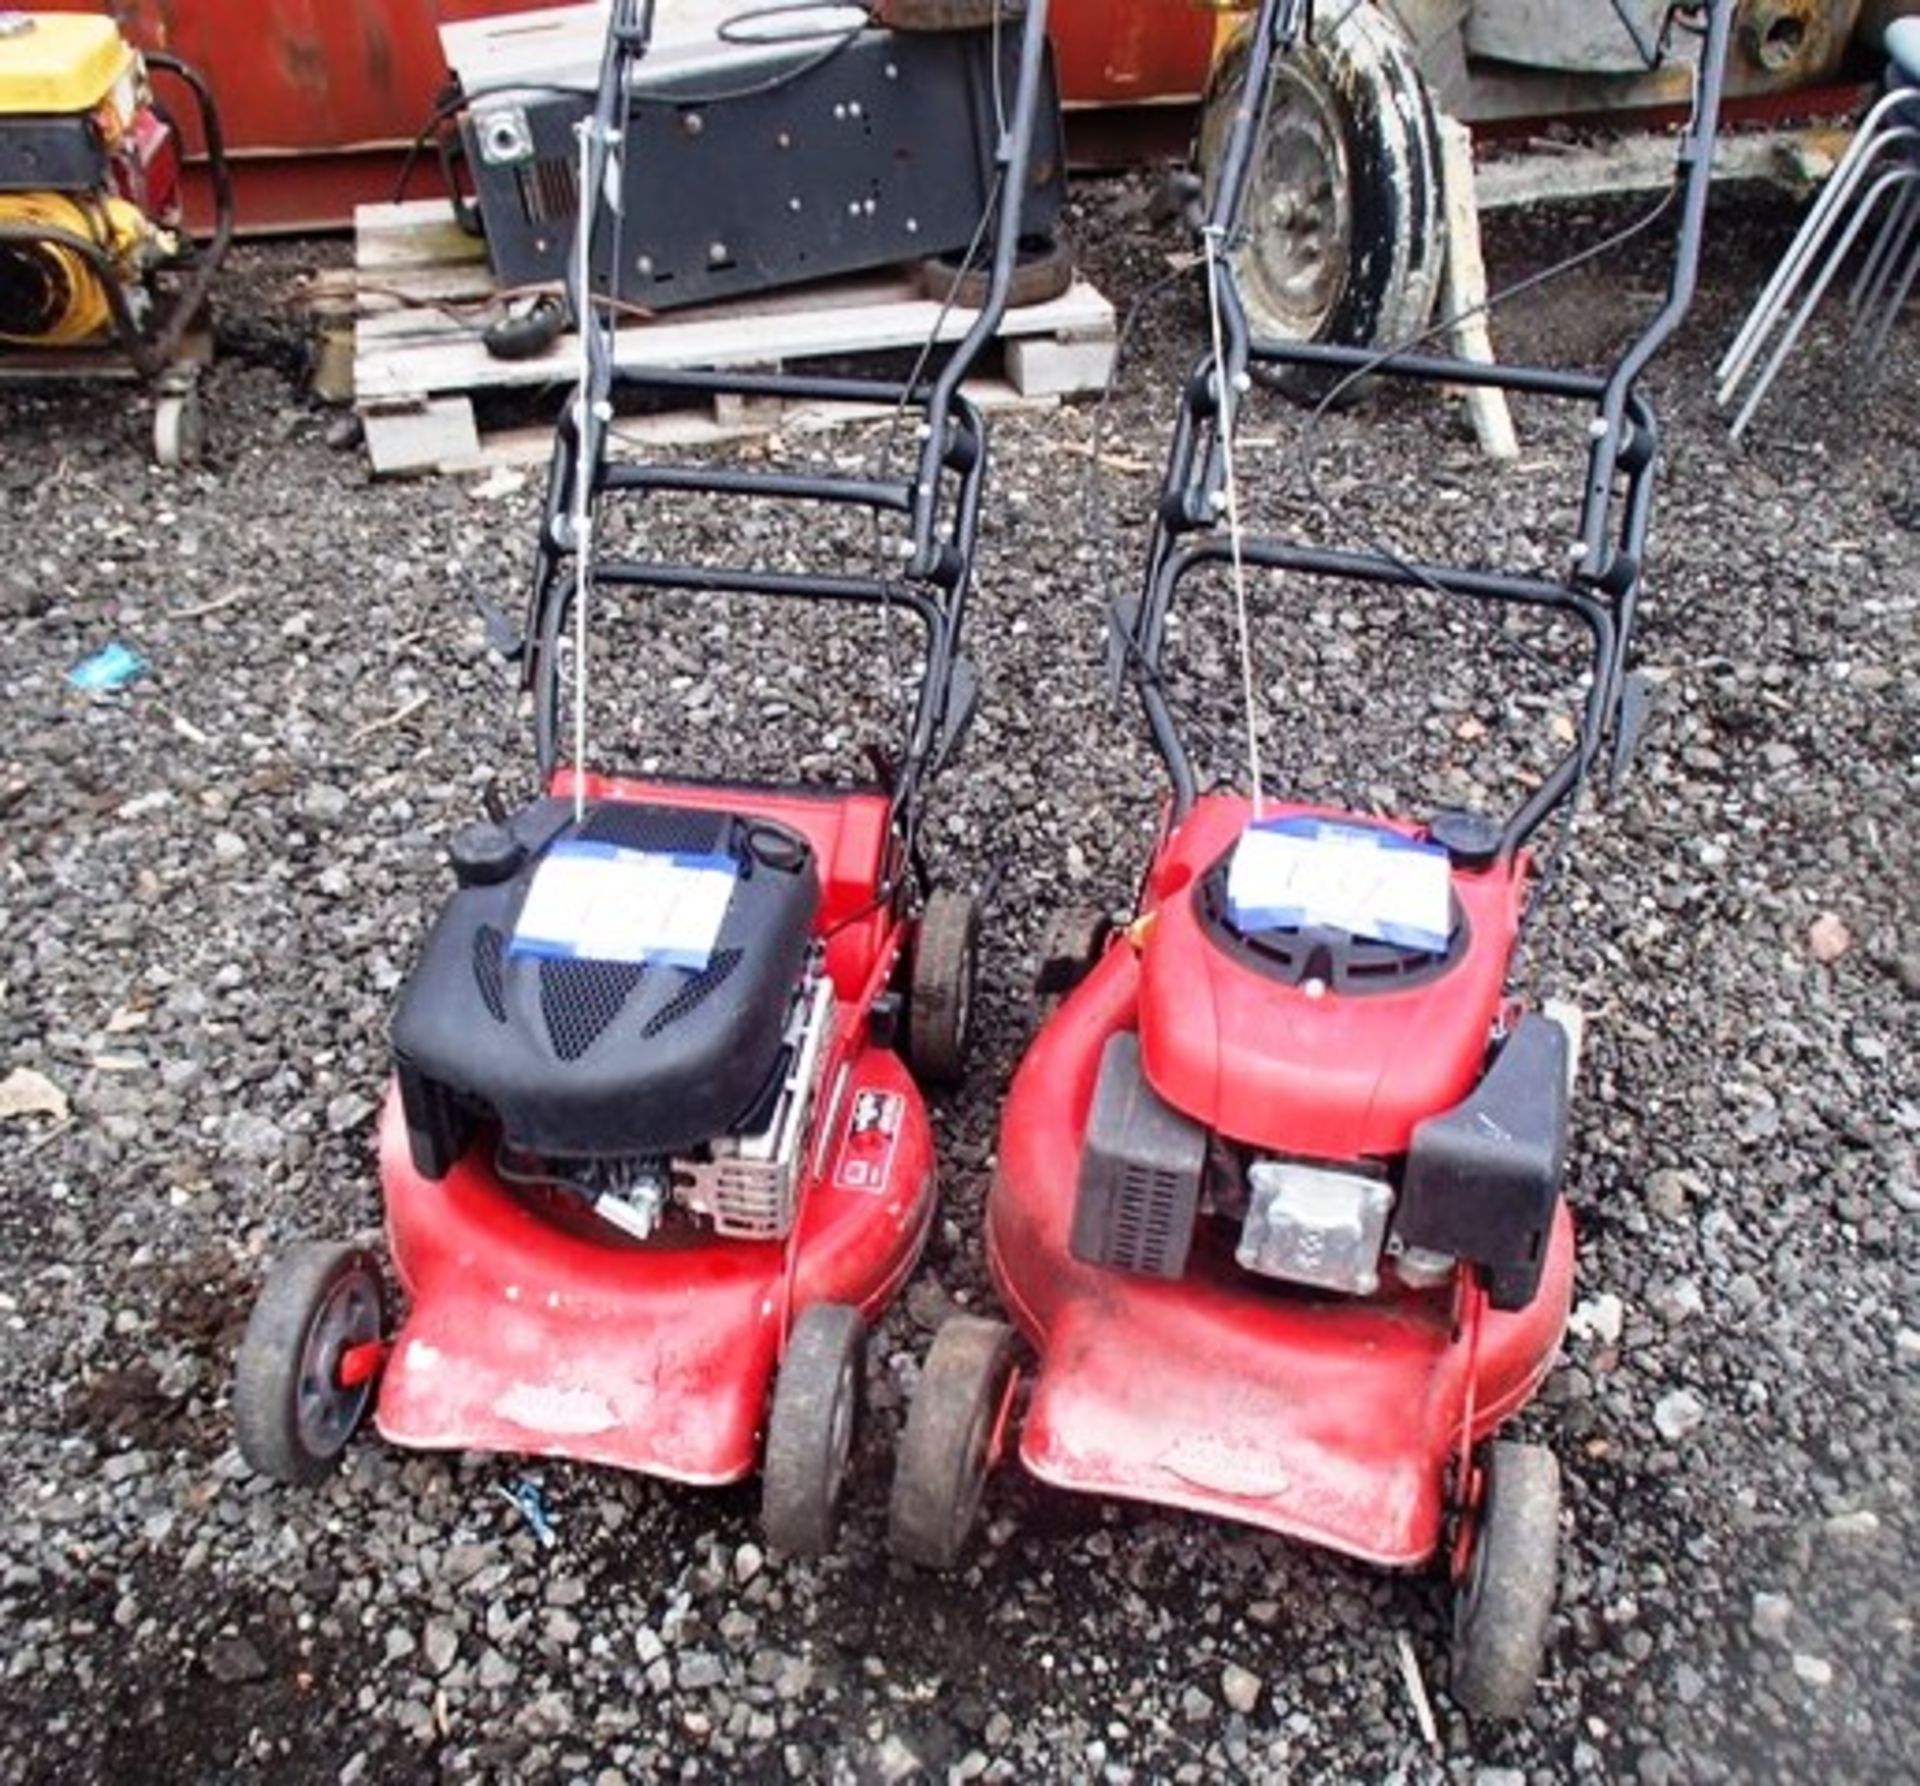 2 REGAL ROVER MULCH MOWERS, SN P030264, P030183*DIRECT FROM COUNCIL*